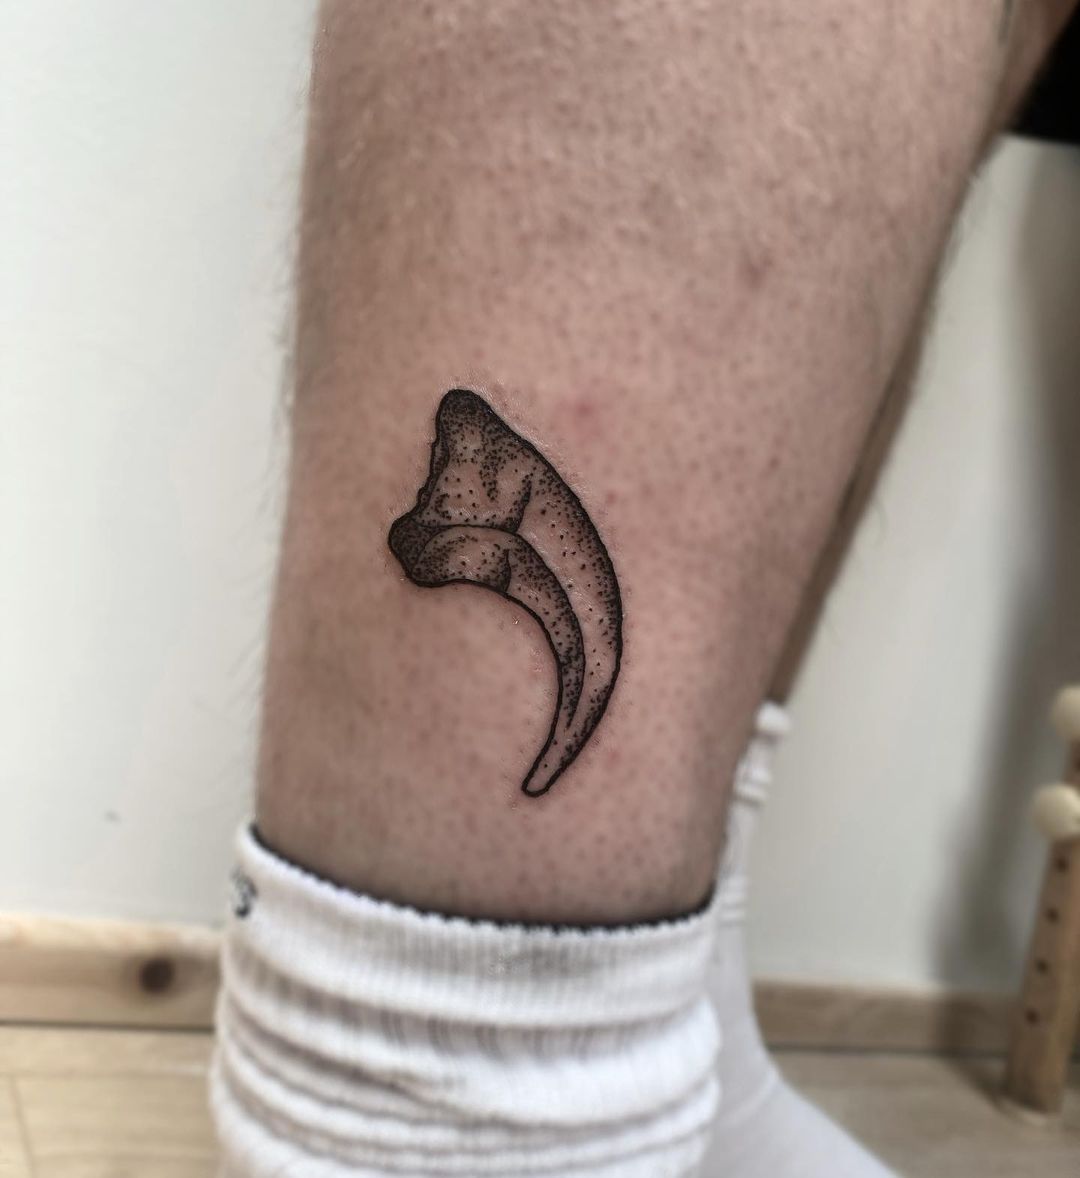 Just A Squid by Row at Tooth  Claw in Essex England  rtattoos